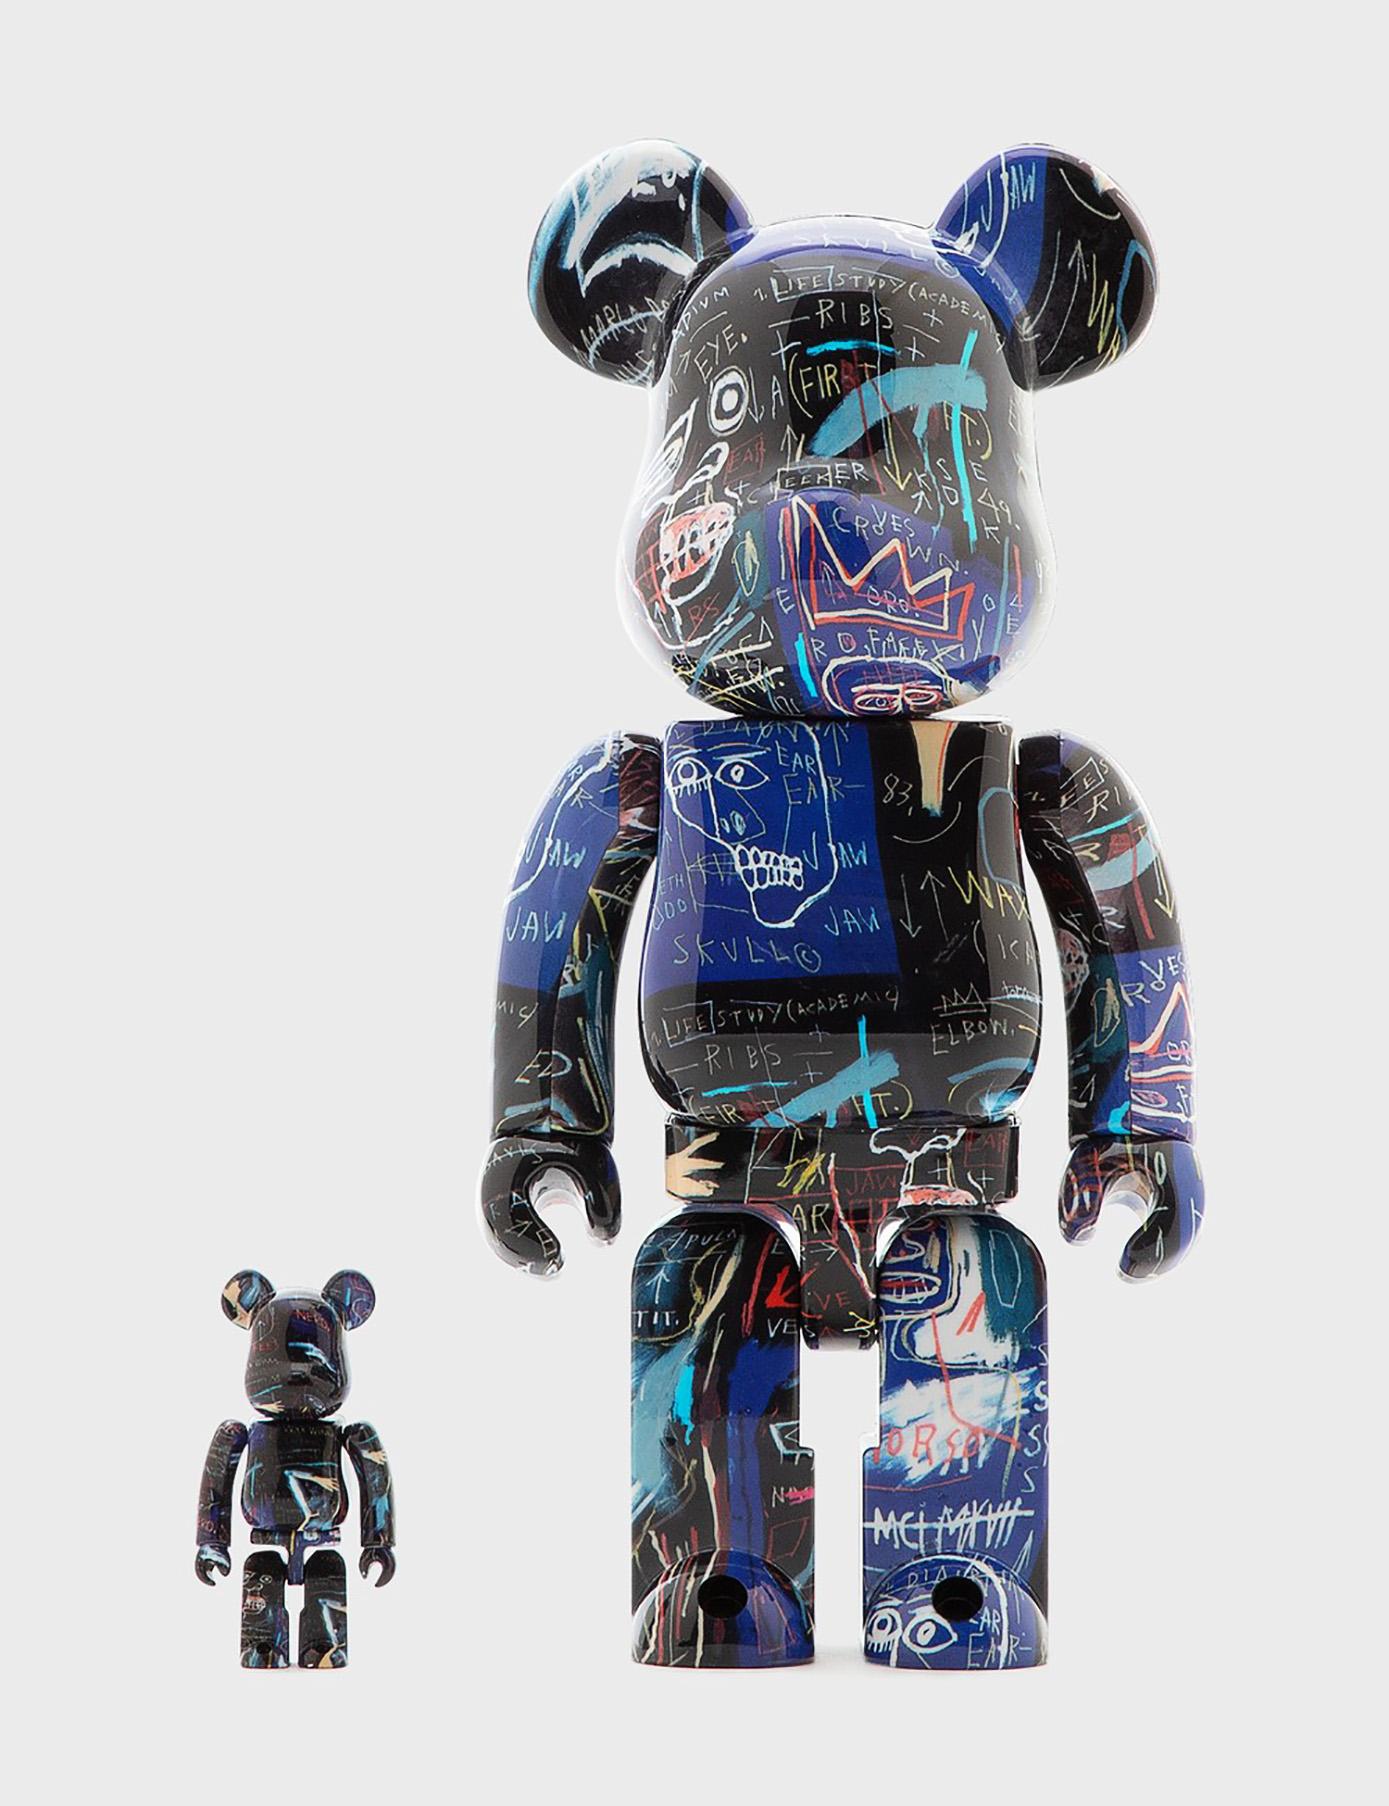 Be@rbrick x Warhol and Basquiat Estates 400% and 100%, set of 2 works - Pop Art Art by Jean-Michel Basquiat